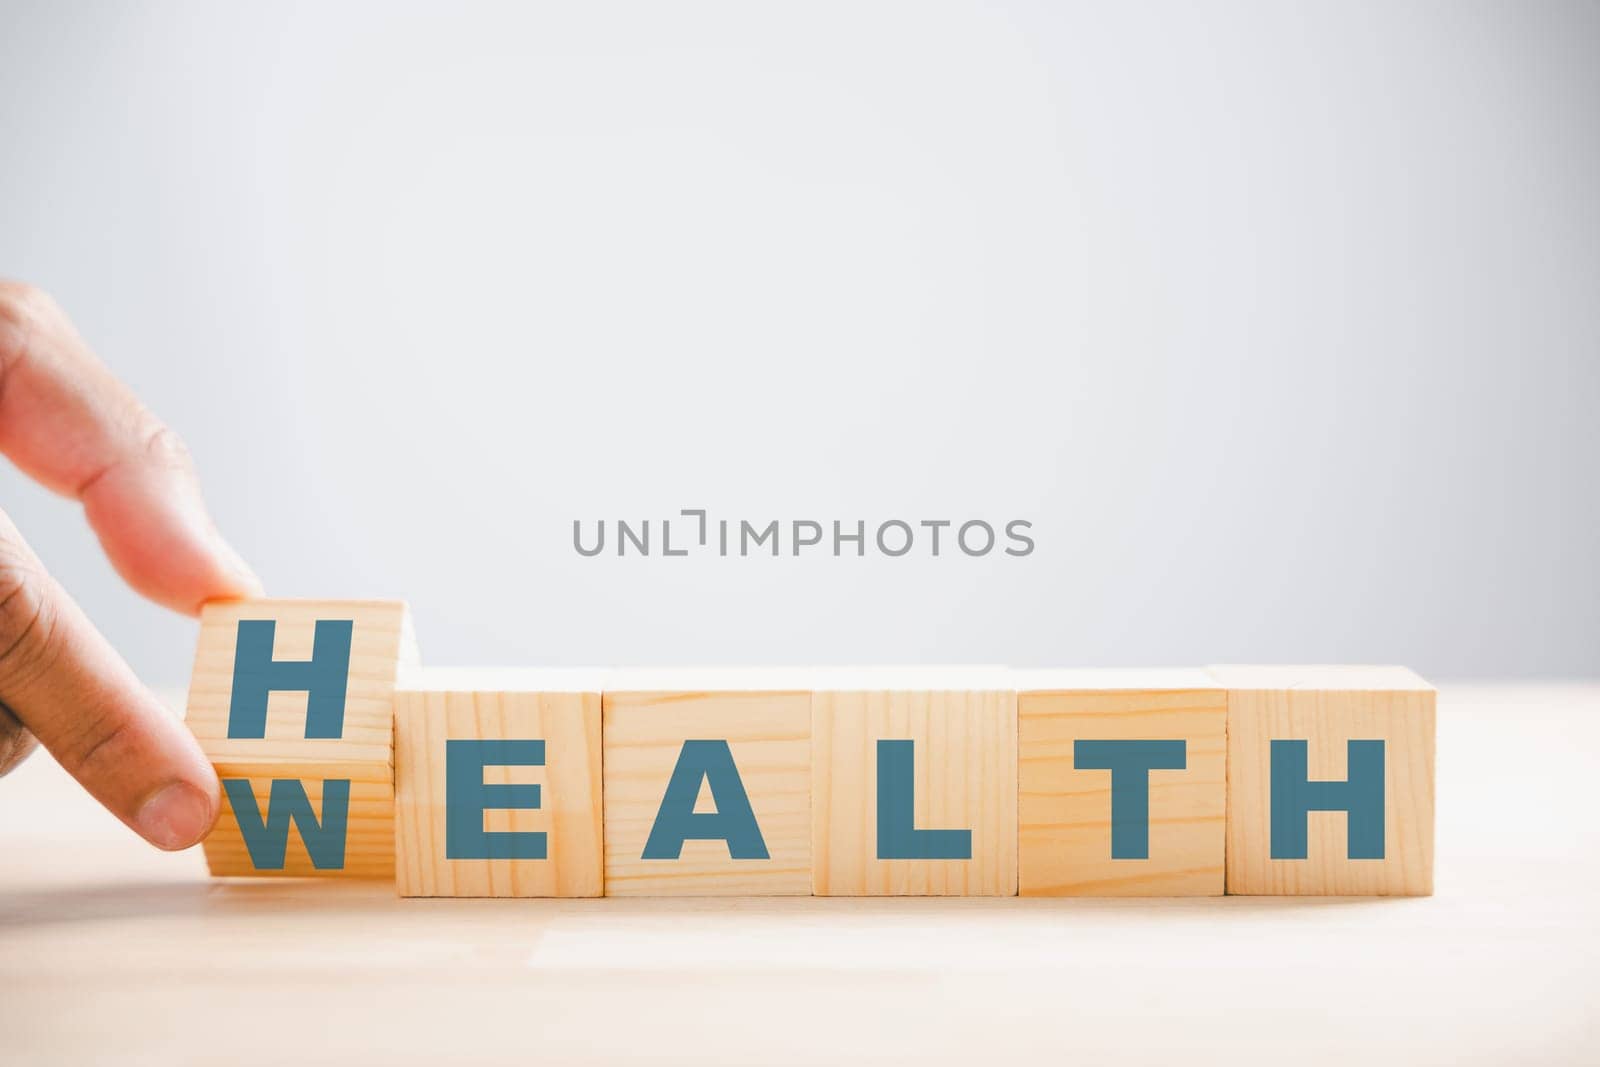 Tabletop cube flip Wealth to Health. Money turned into health concept. Medical investment for a secure future. Wellness healthcare